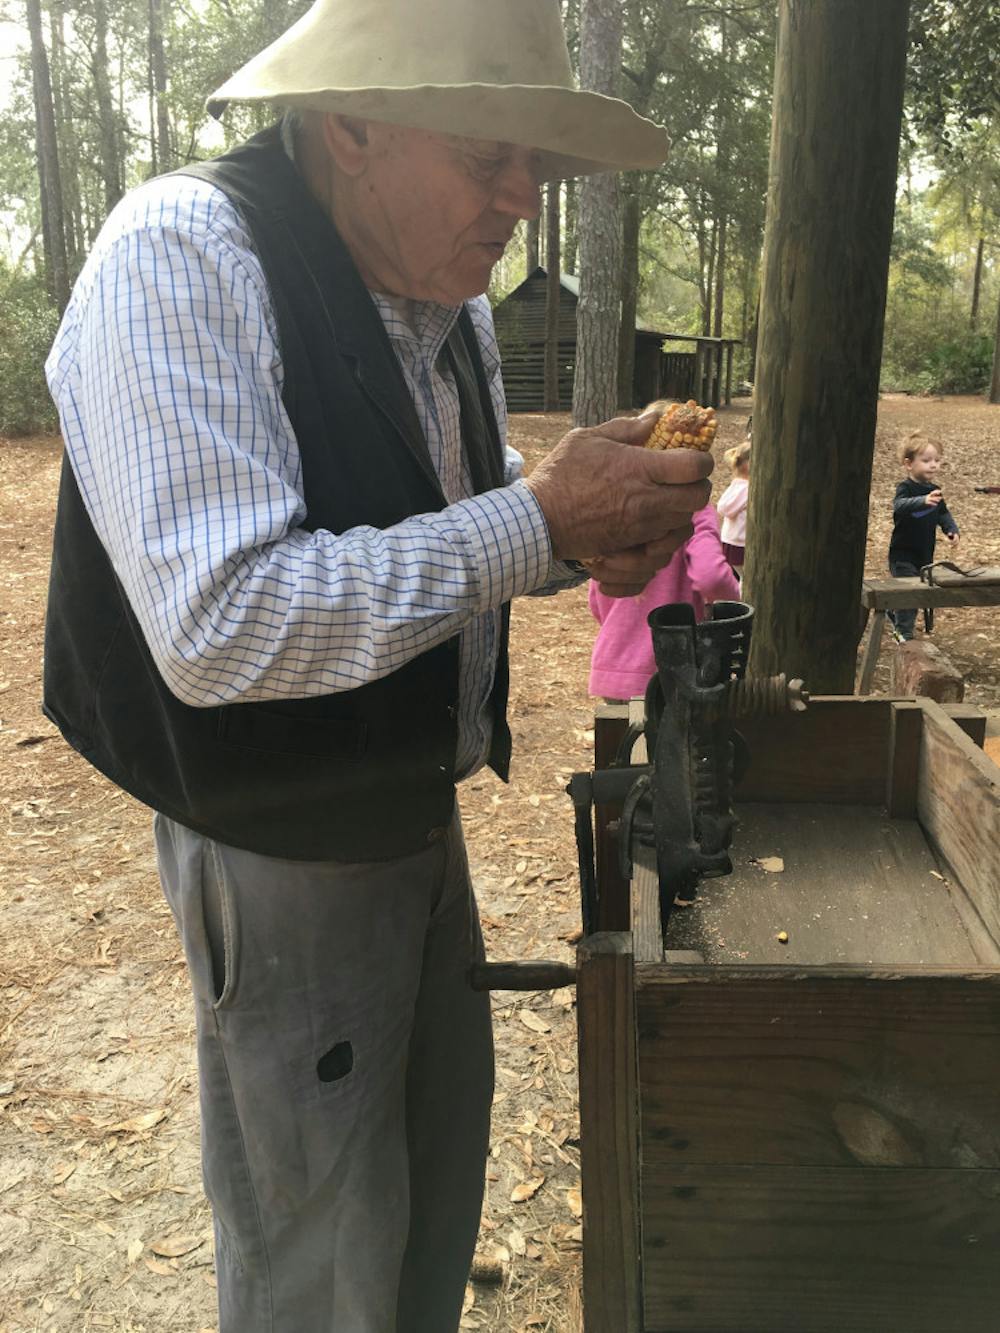 <p>Morningside Nature Center staffer George Chappell shows visiting children how to use the corn sheller that would've been used in 1870.</p>